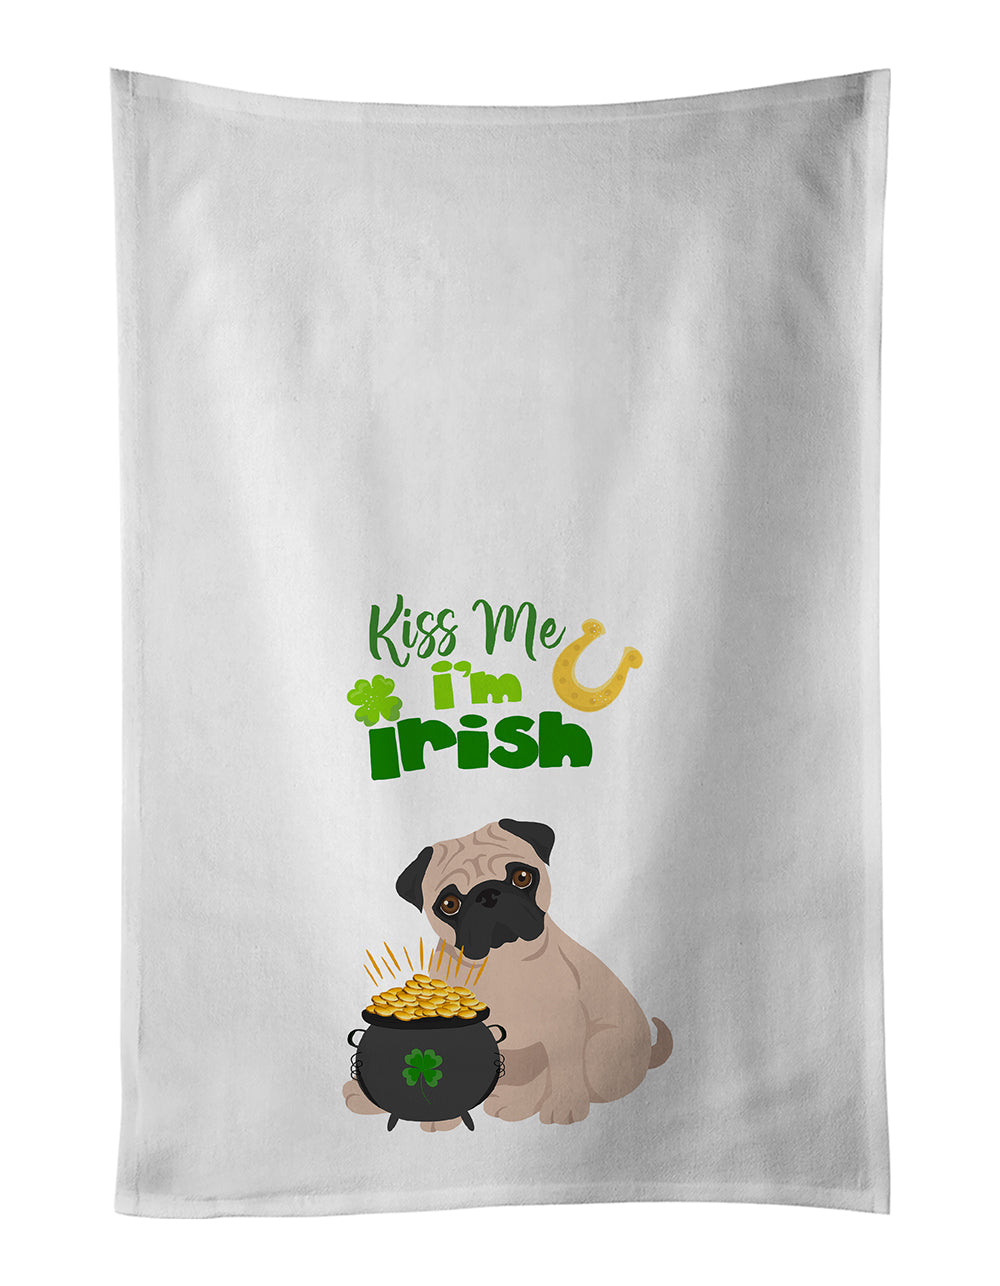 Buy this Fawn Pug St. Patrick's Day White Kitchen Towel Set of 2 Dish Towels